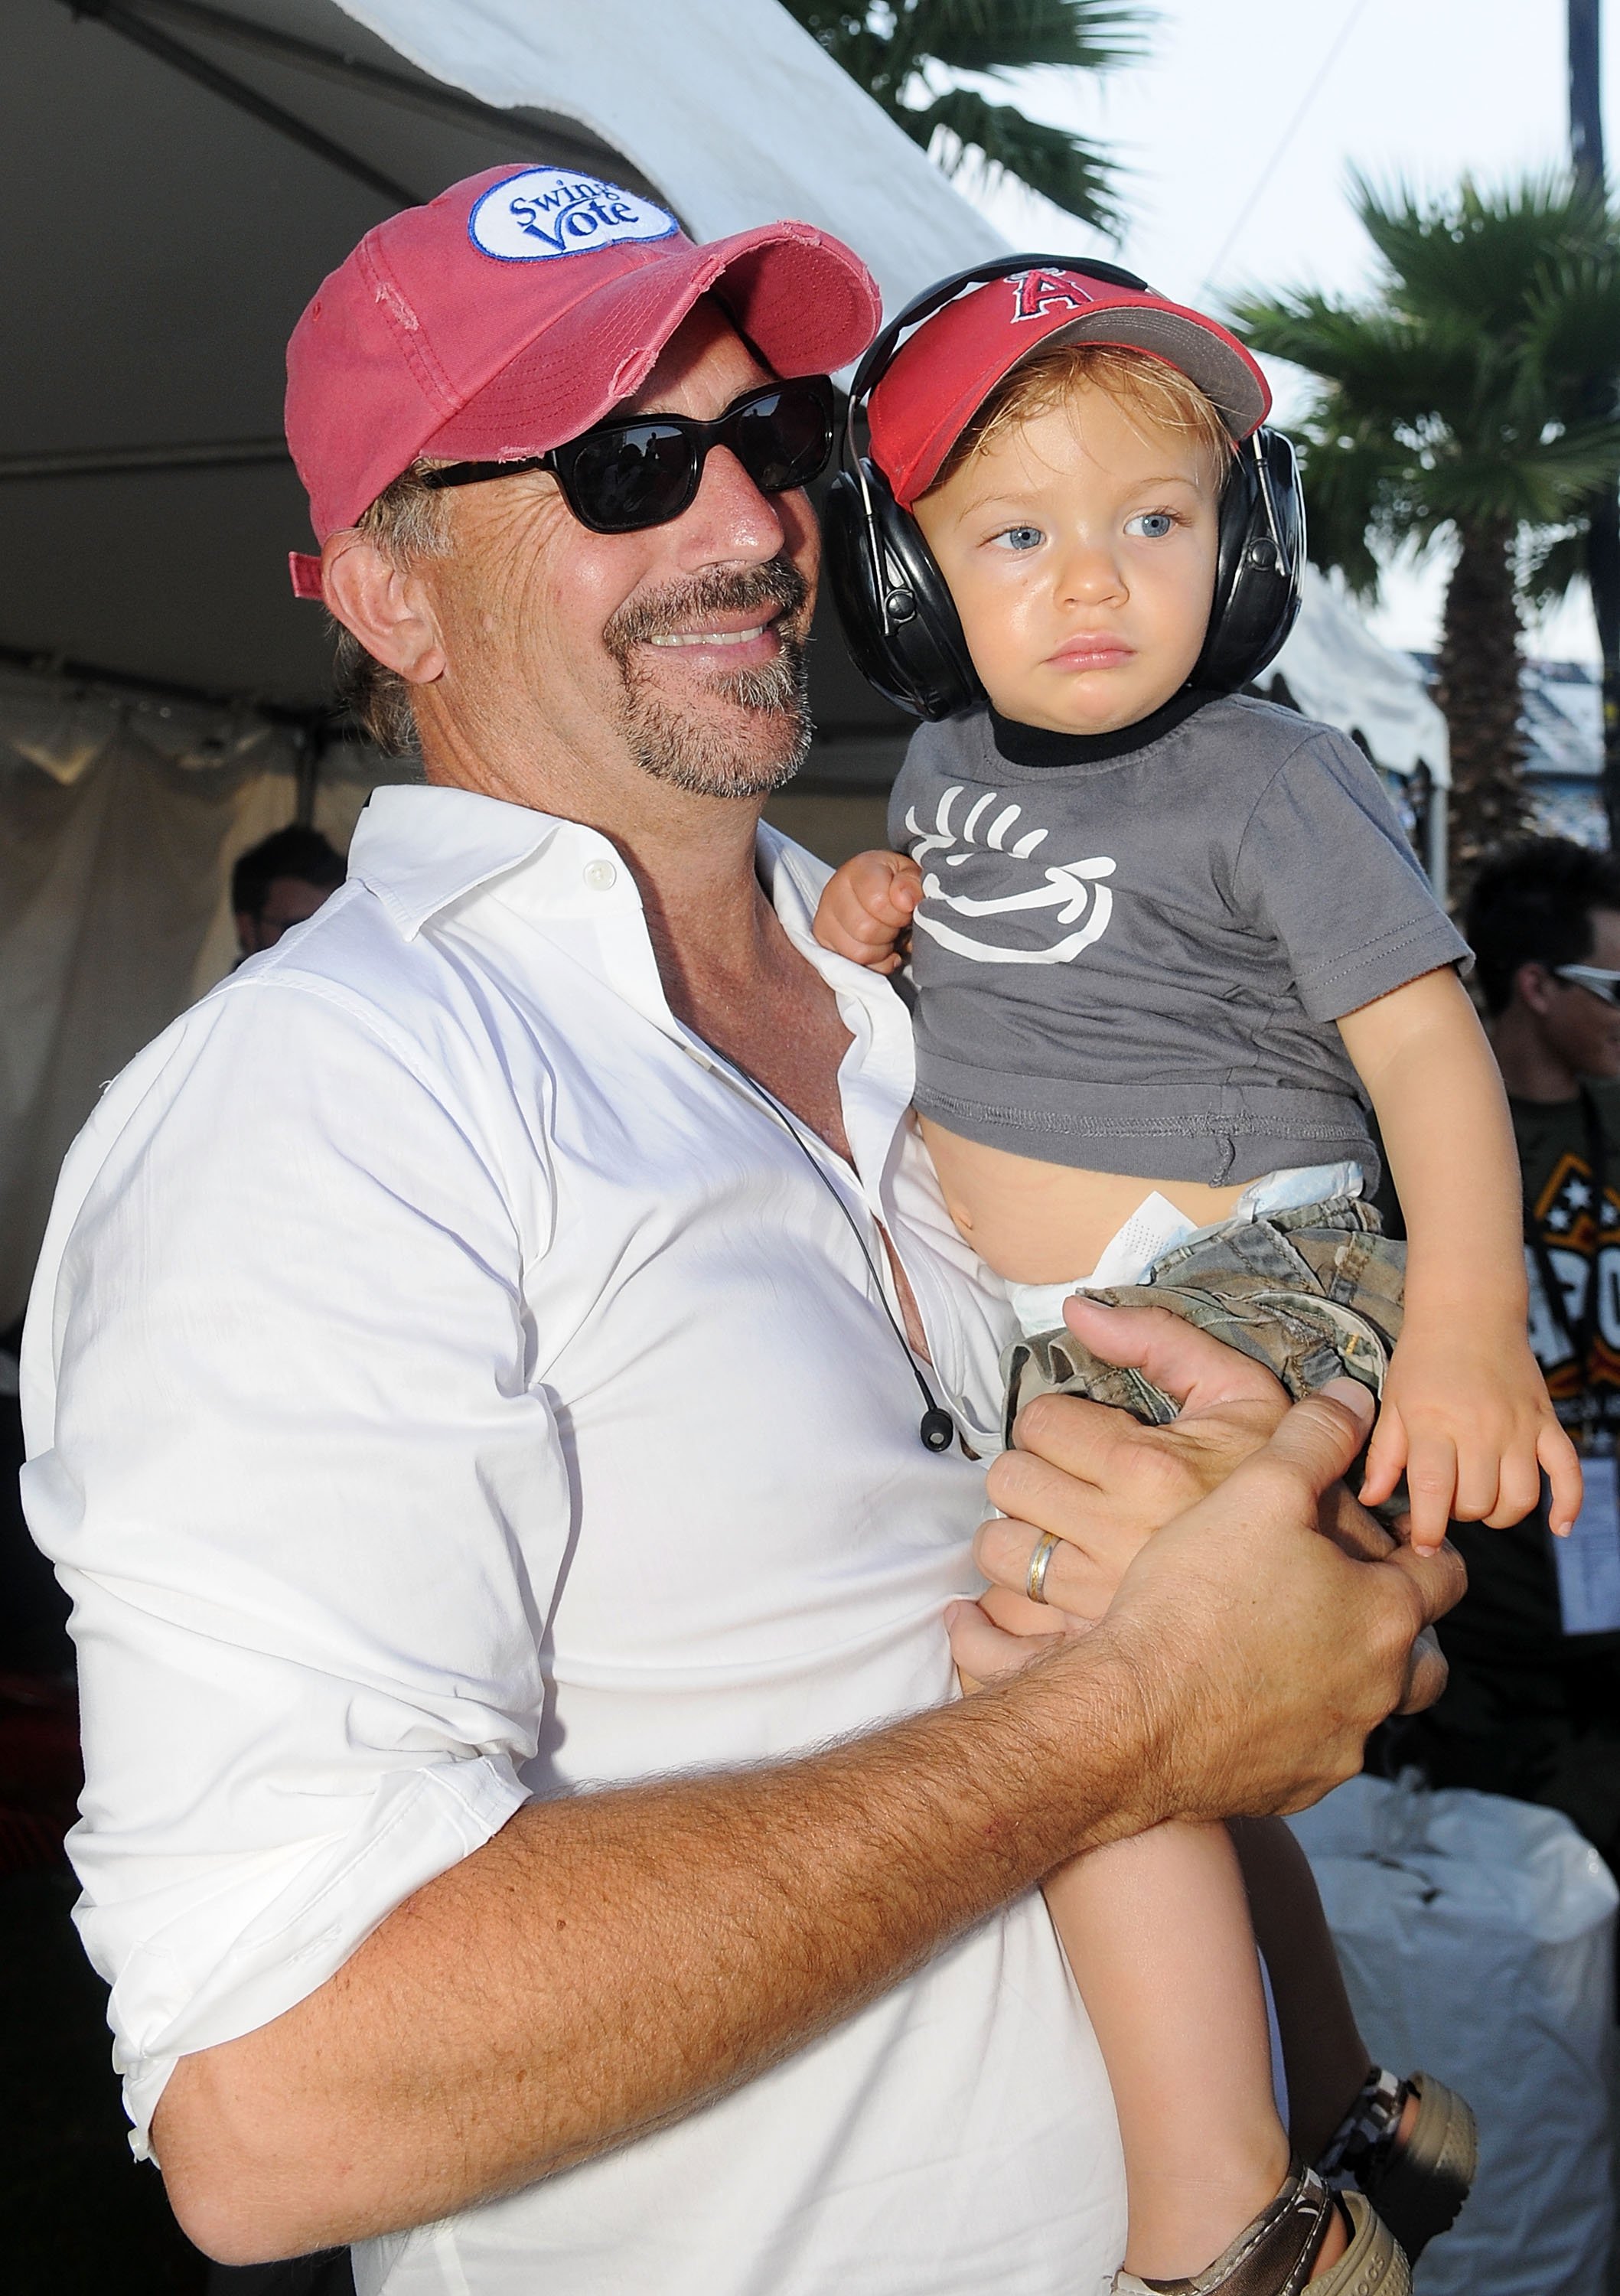 Kevin and Cayden Costner at the NASCAR Sprint Cup Series in Daytona Beach on July 5, 2008 | Source: Getty Images 